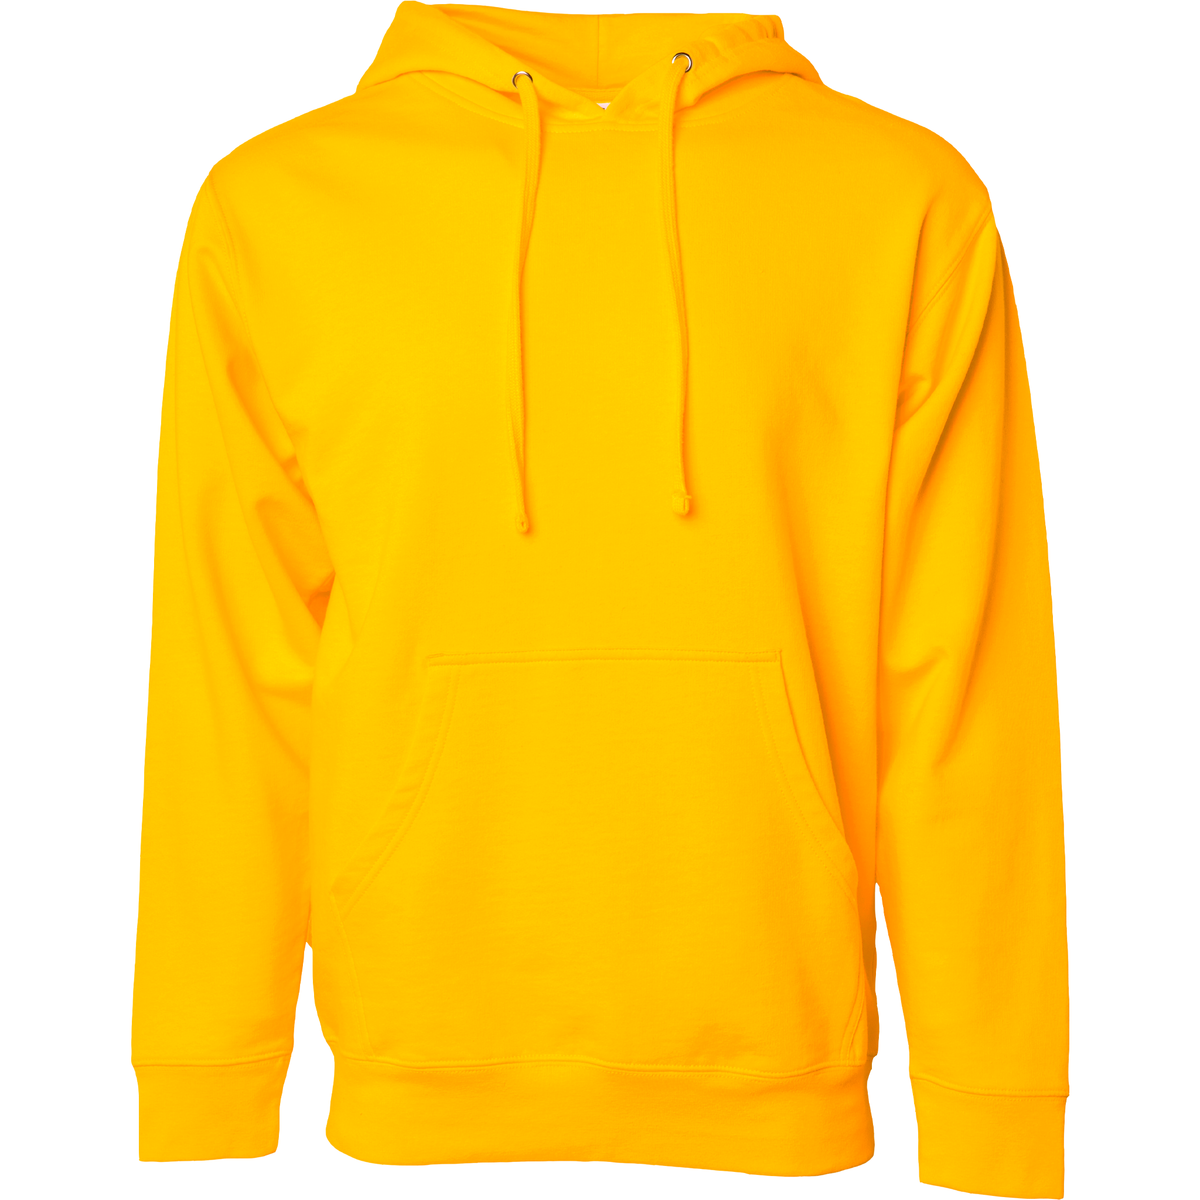 SS4500 #3 - Midweight Hooded Pullover Sweatshirt